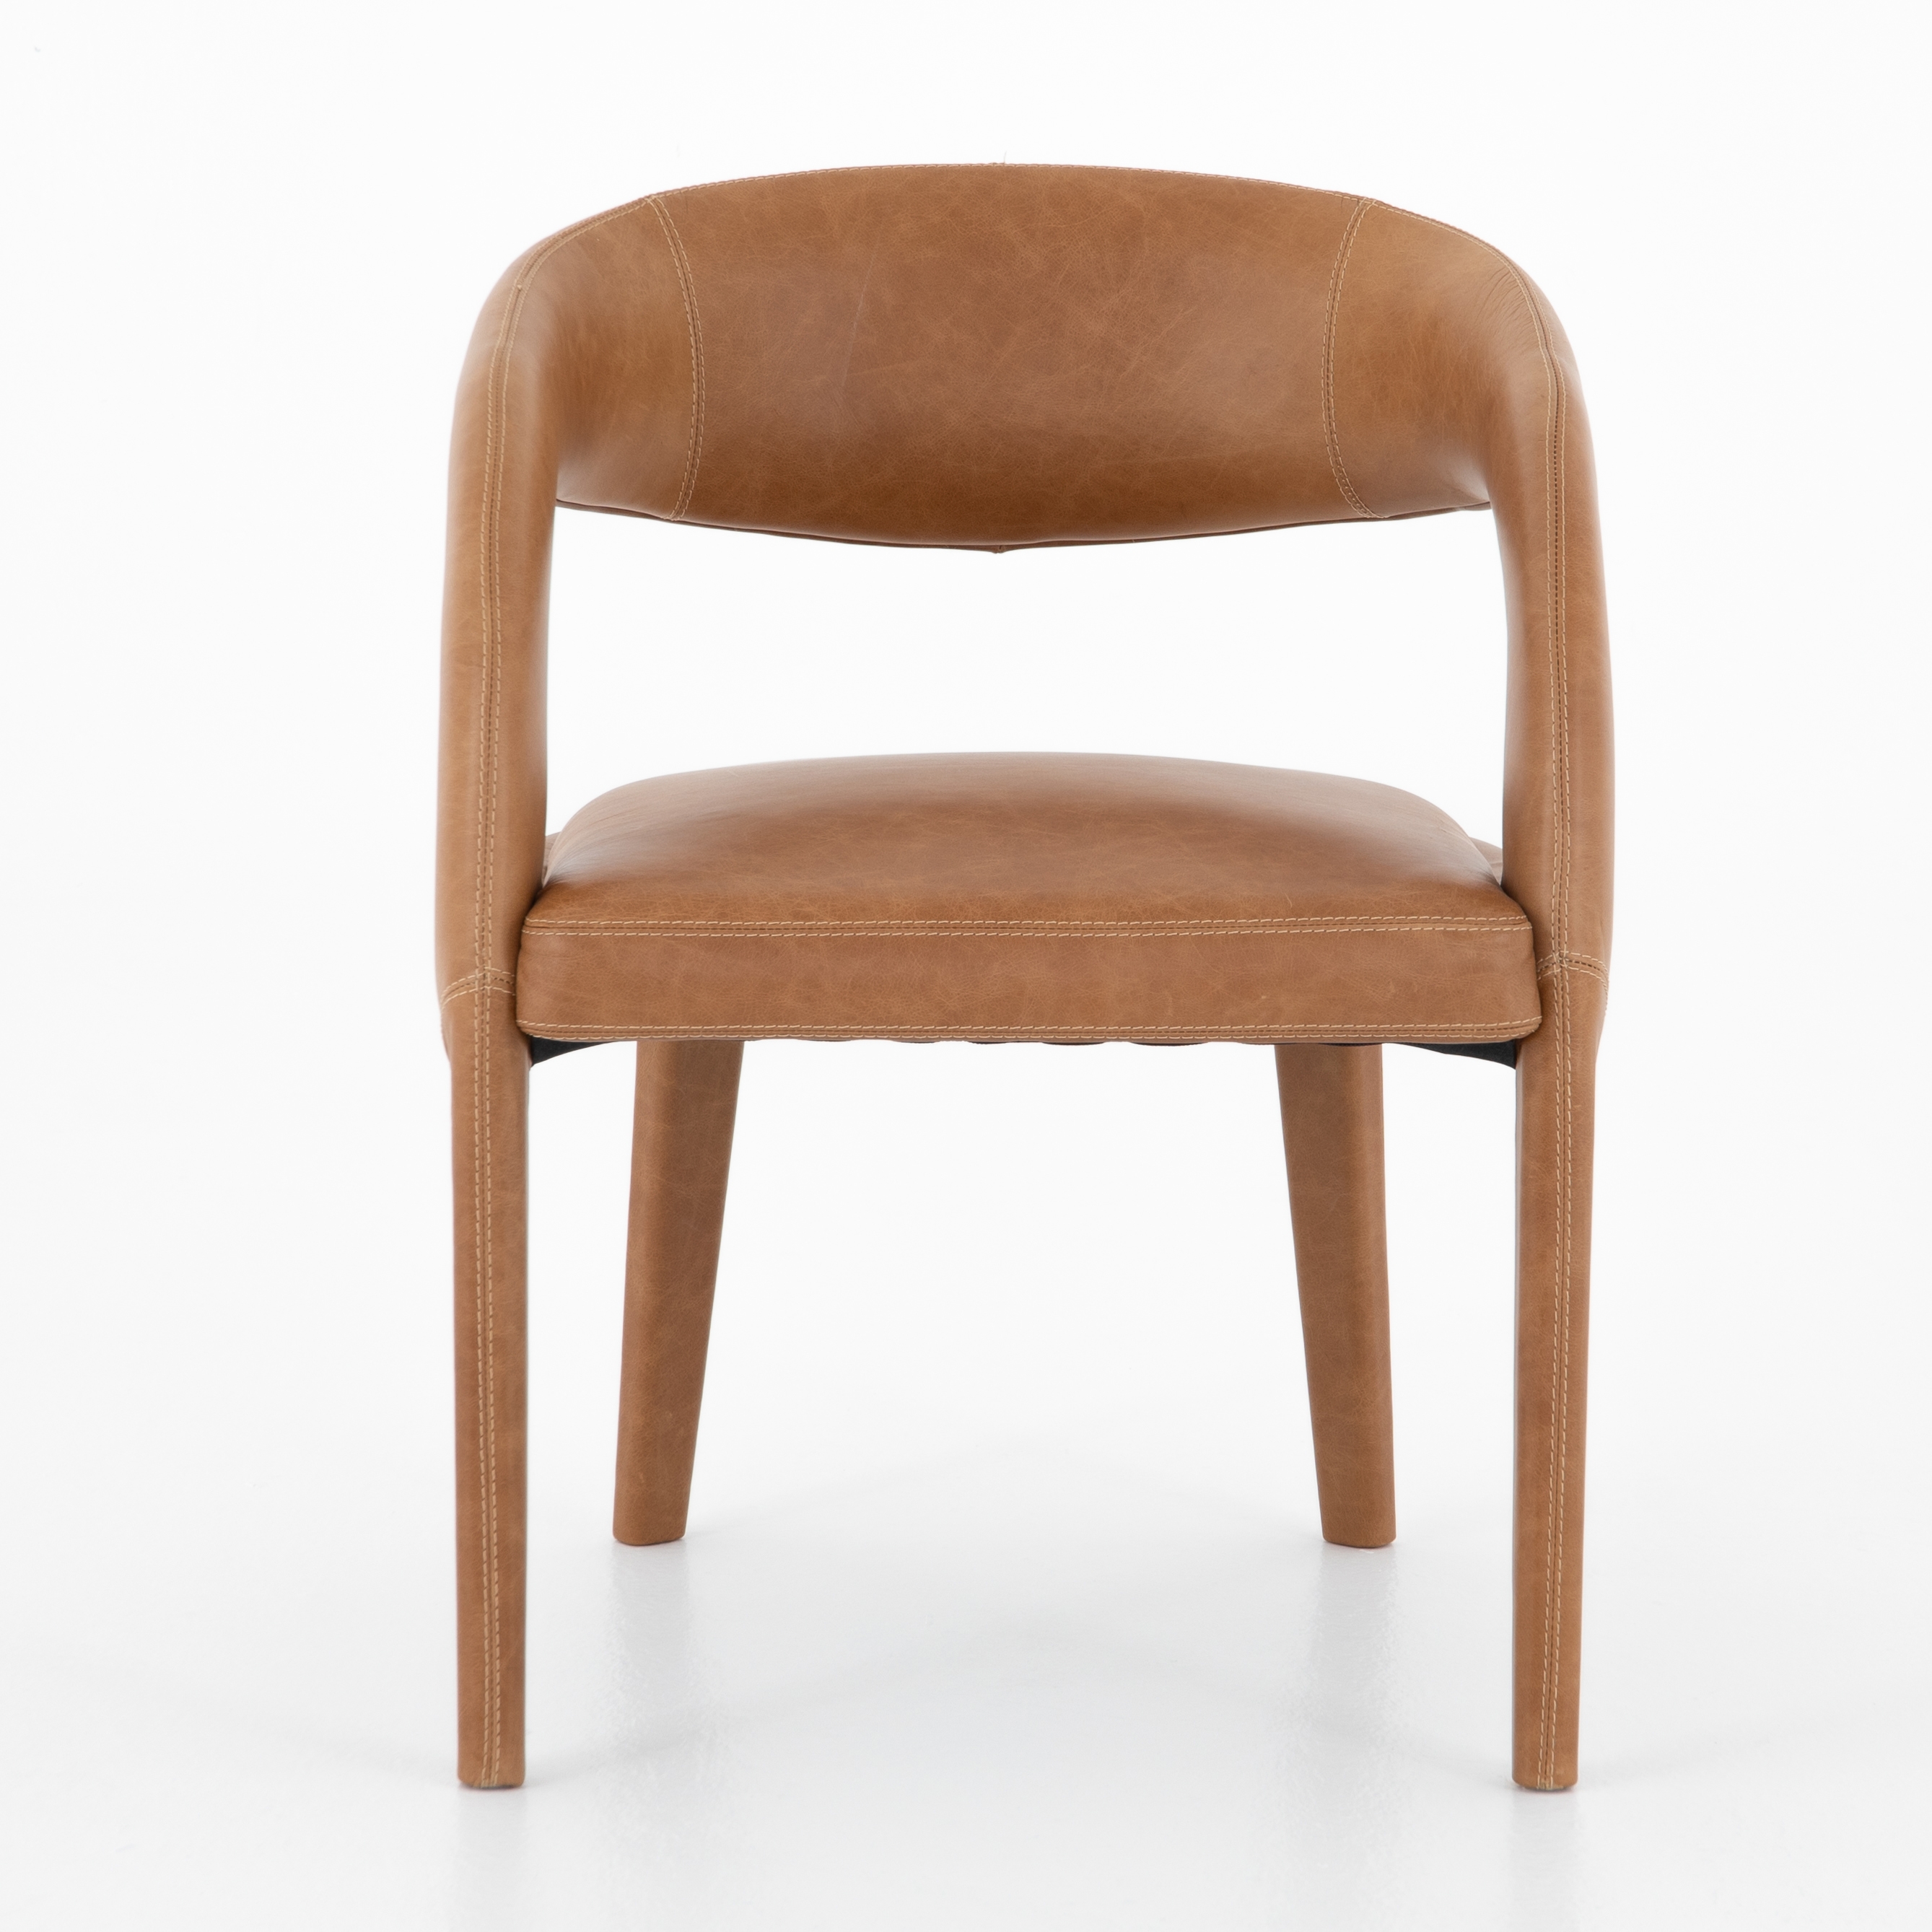 Hawkins Dining Chair-Butterscotch - Image 4